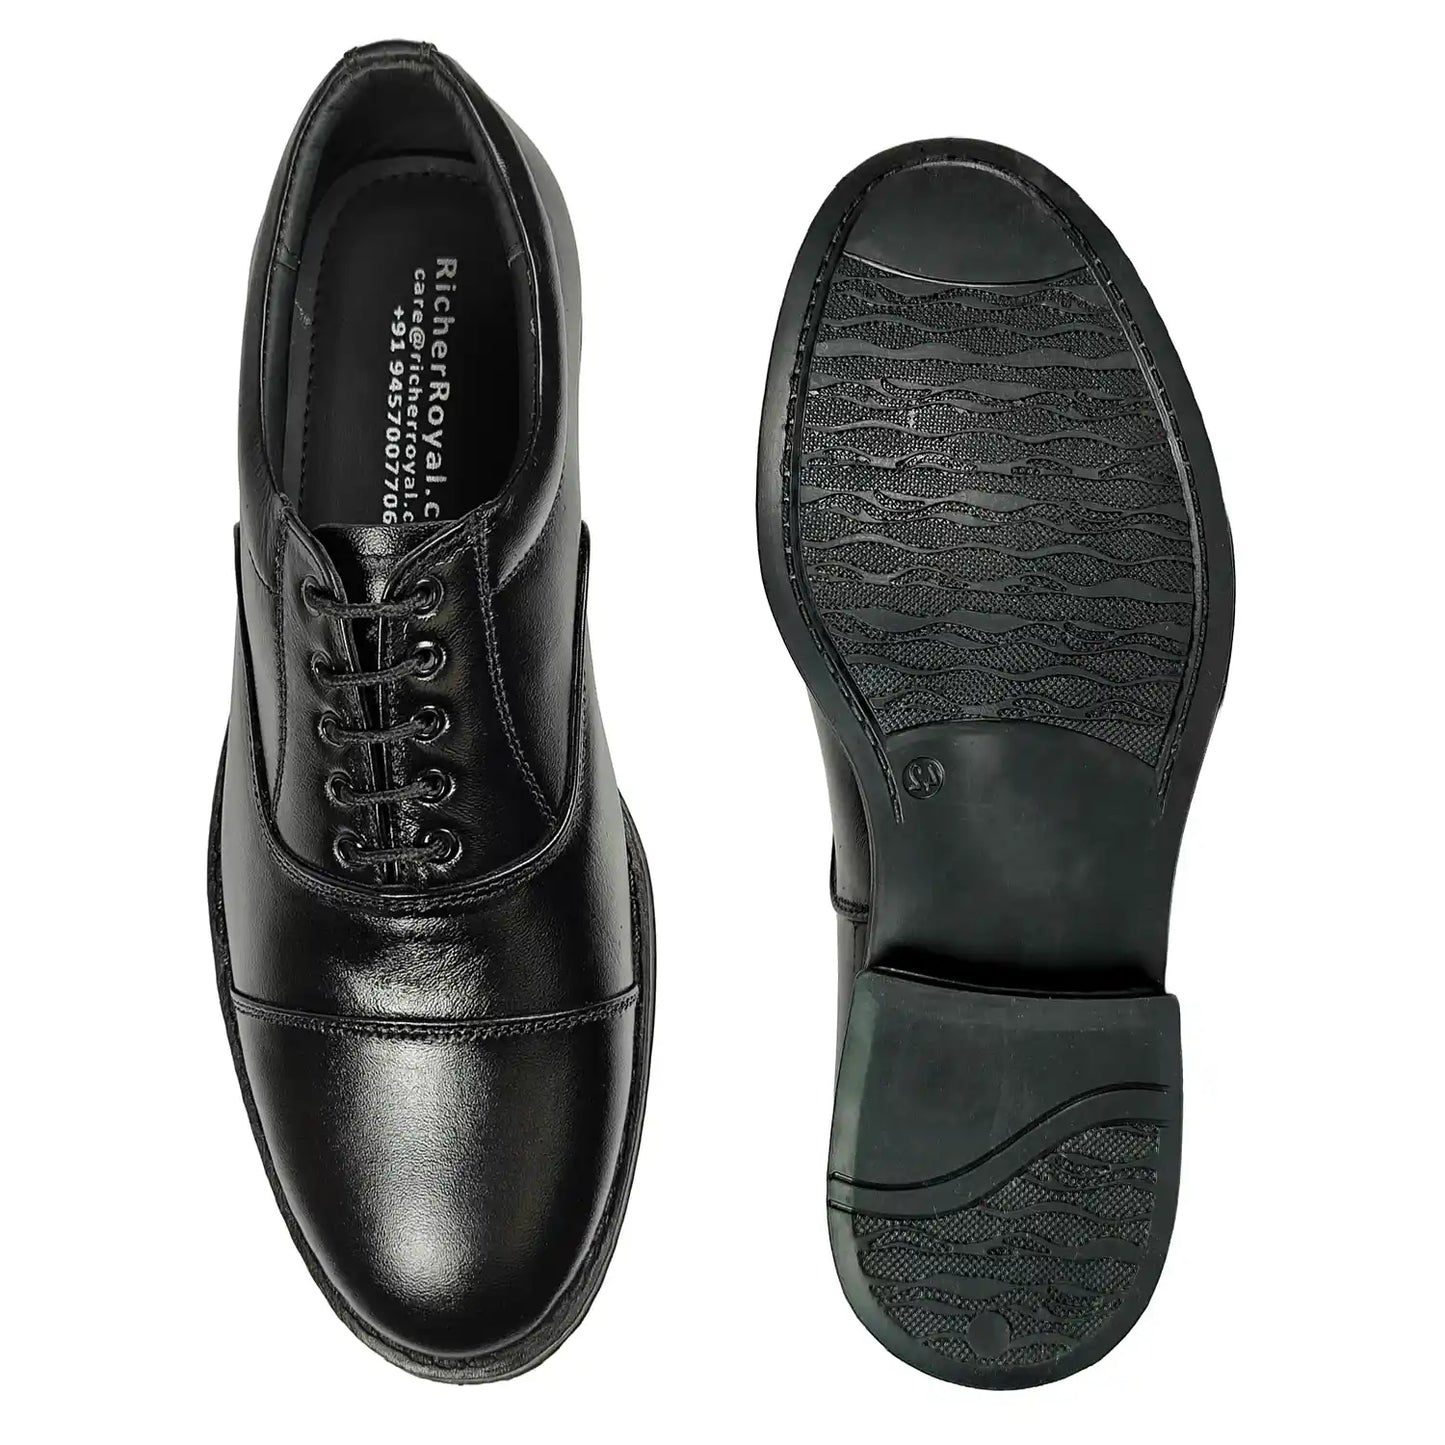 Police Dress Shoes Pure Leather Oxford for Men